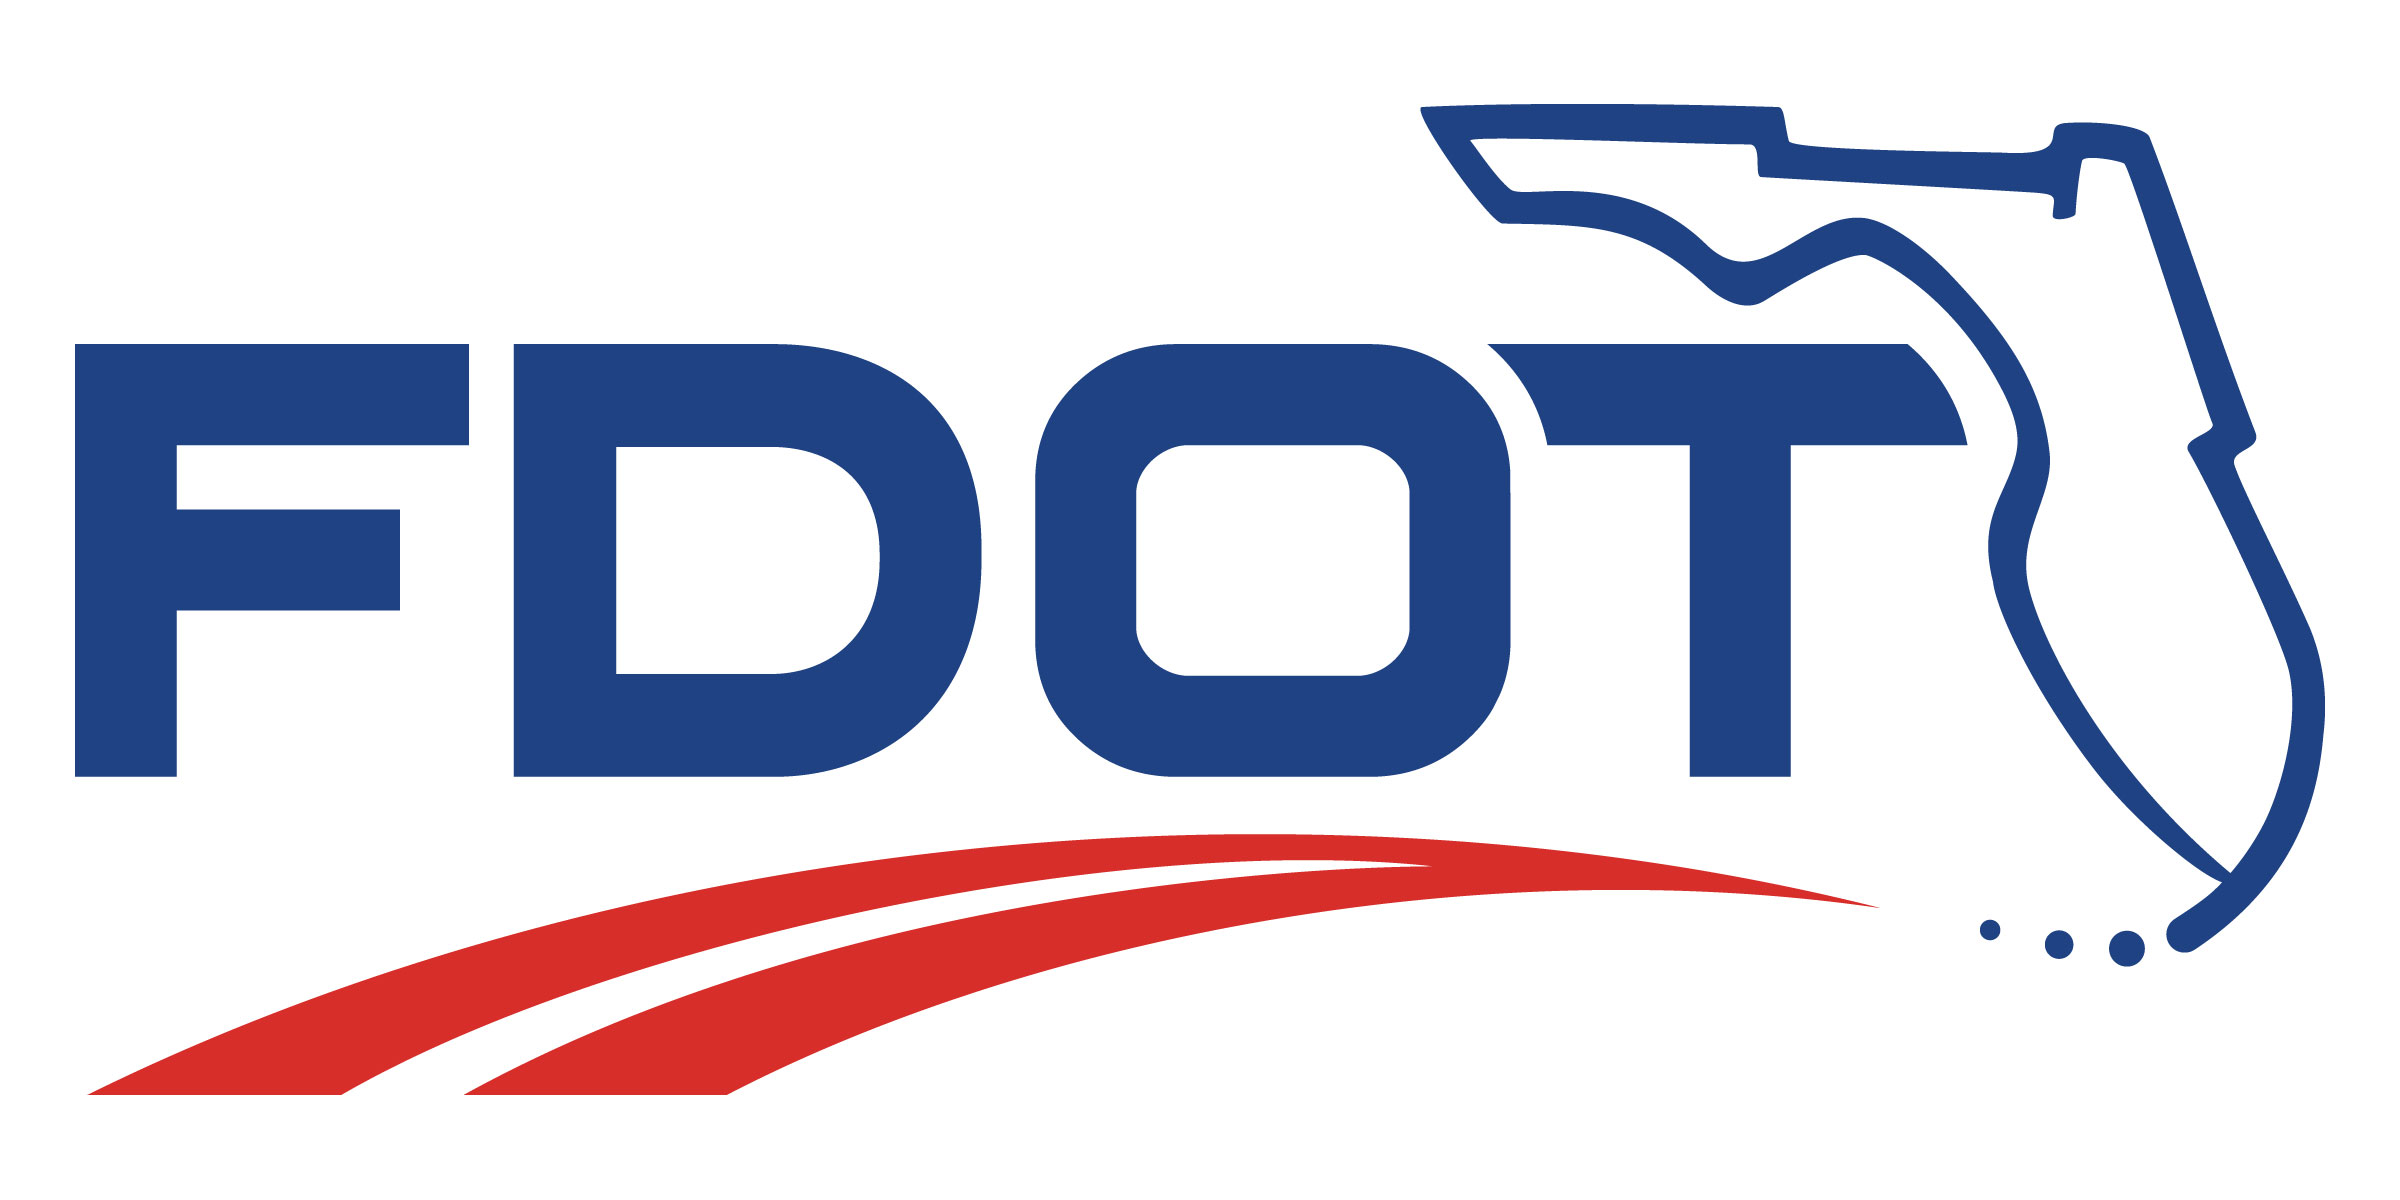 State of Florida Department of Transportation logo - link to the FDOT website